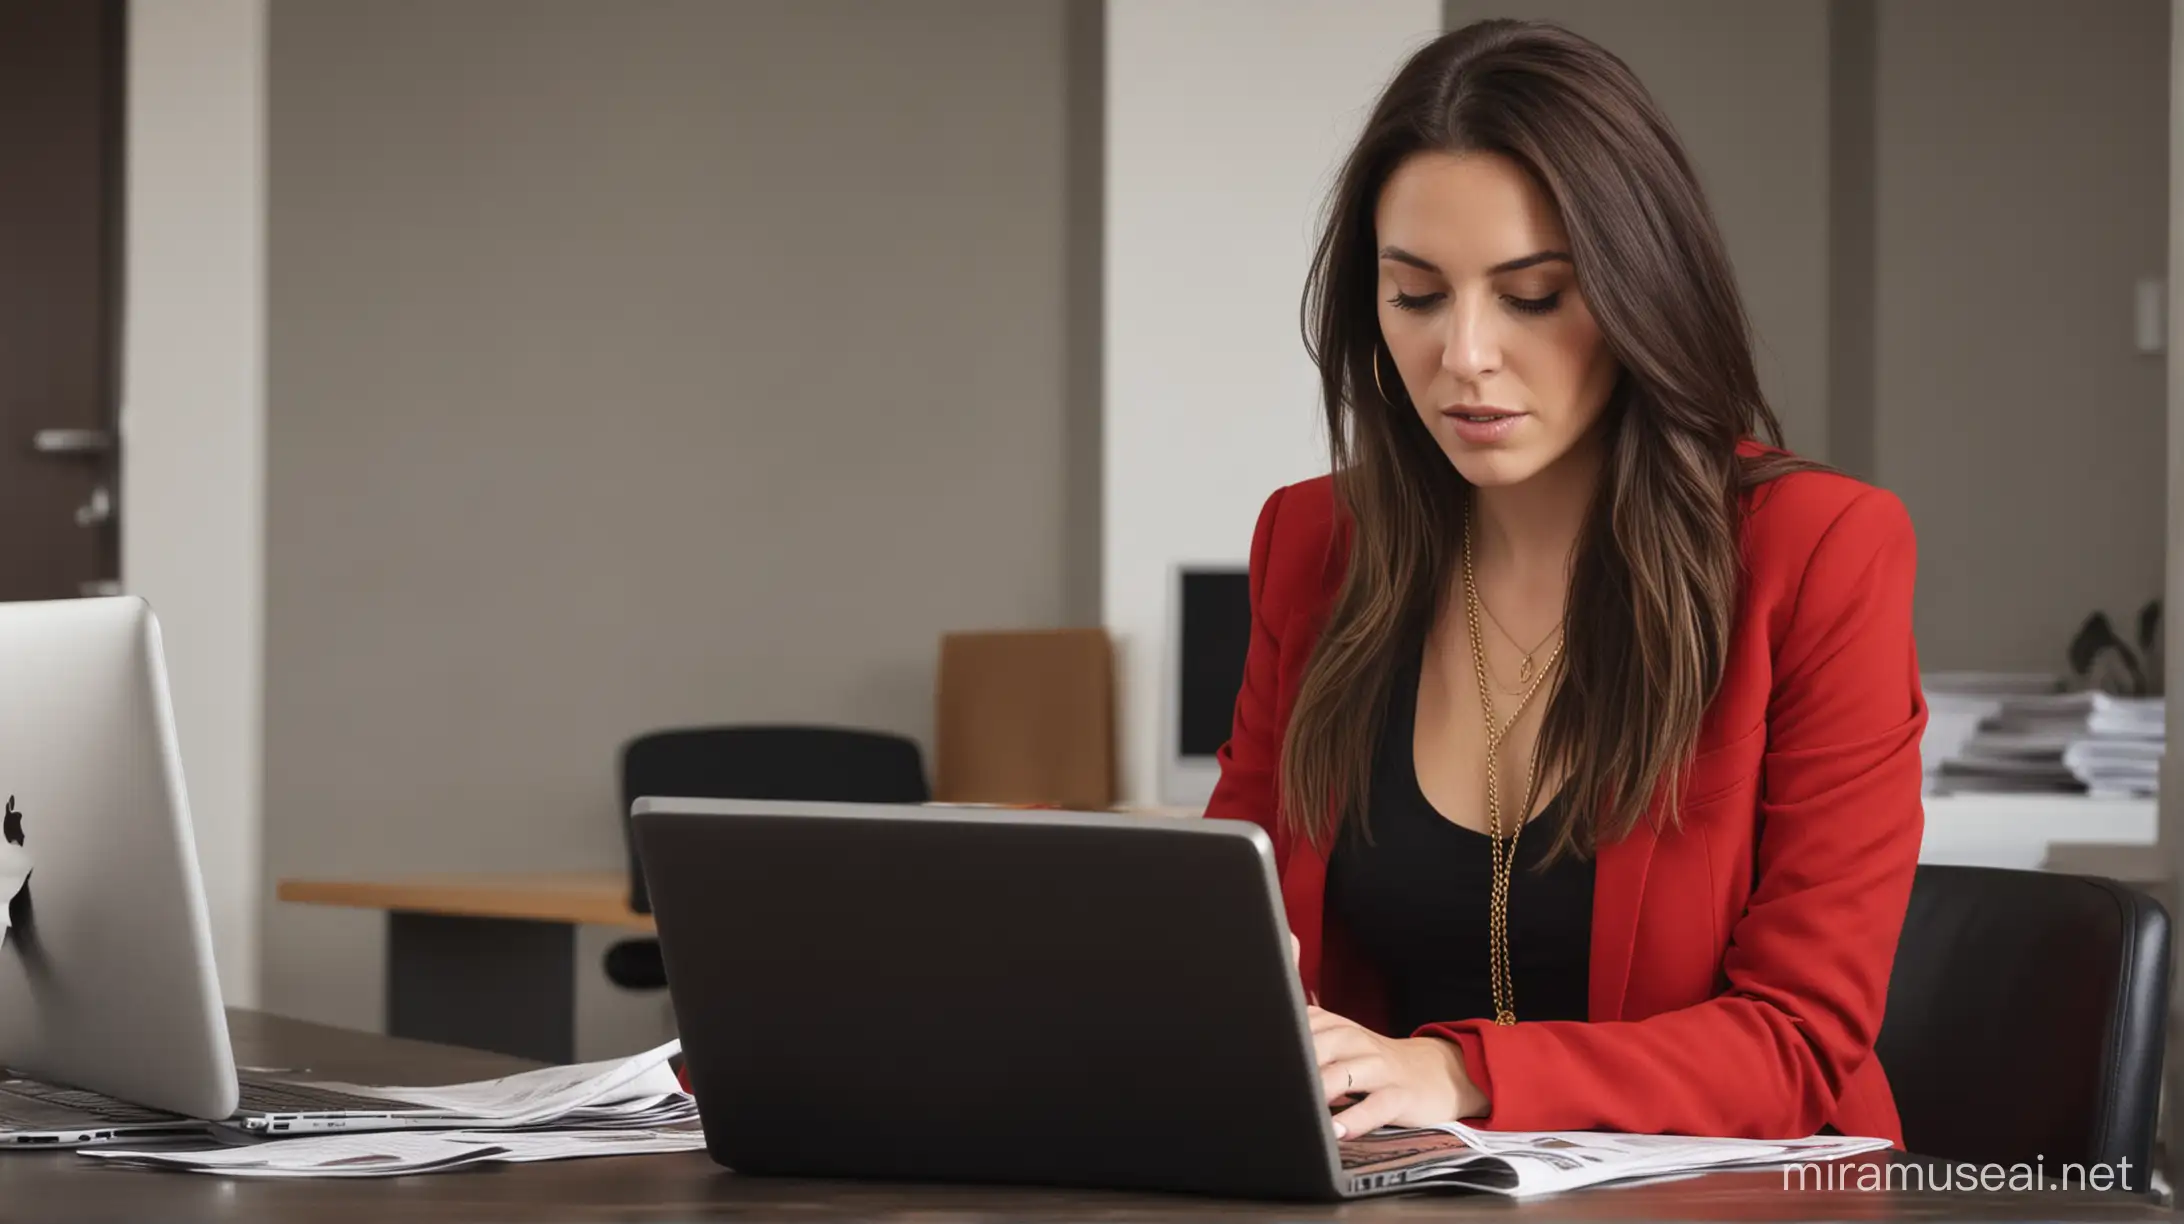 30 year old white woman with long dark brown hair wearing a gold necklace, red blazer, low cut black shirt and black dress pants. She is looking down typing on a generic laptop, crowded modern newspaper office setting